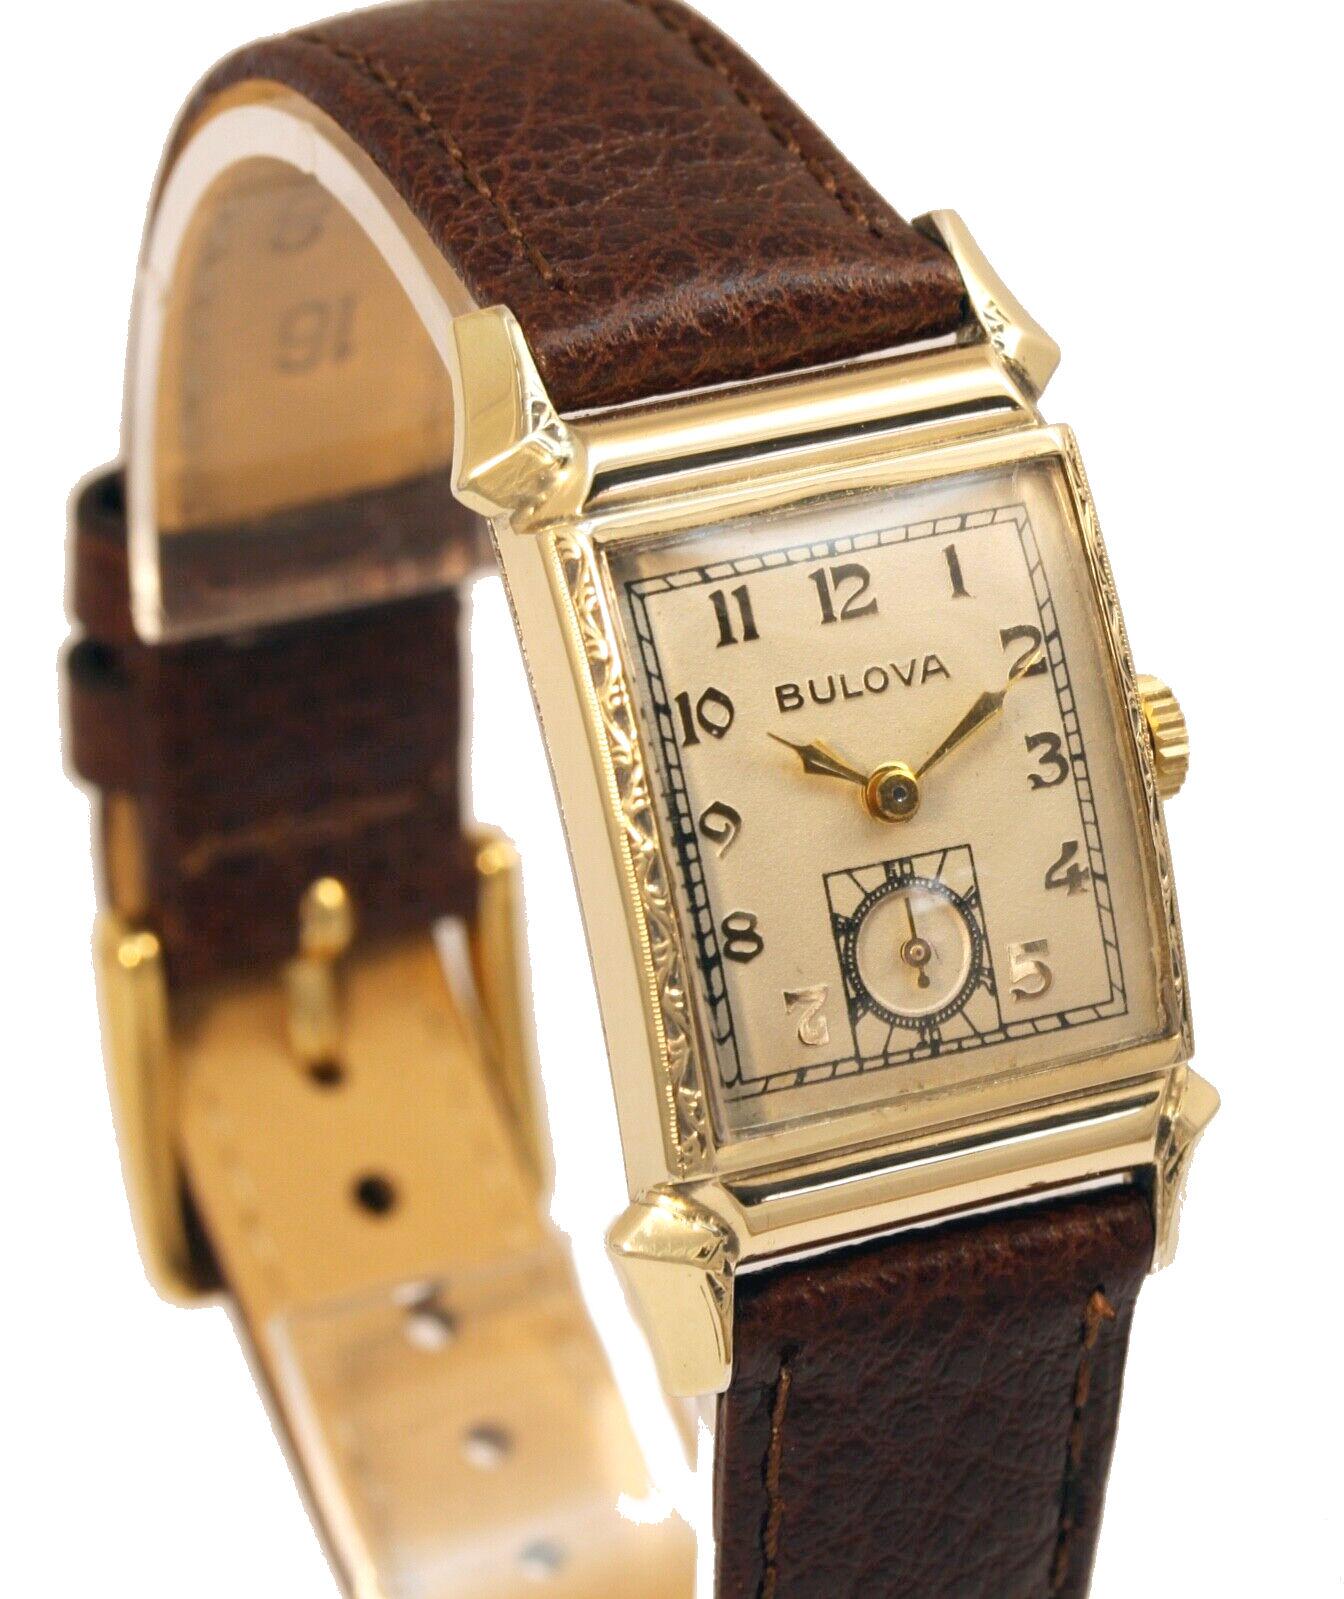 For your consideration is this superb Art Deco gents manual watch made in New York in 1943 by the makers BULOVA. This gents watch features a striking Art Deco dial and is ready to wear having just undergone a full overhaul and professional